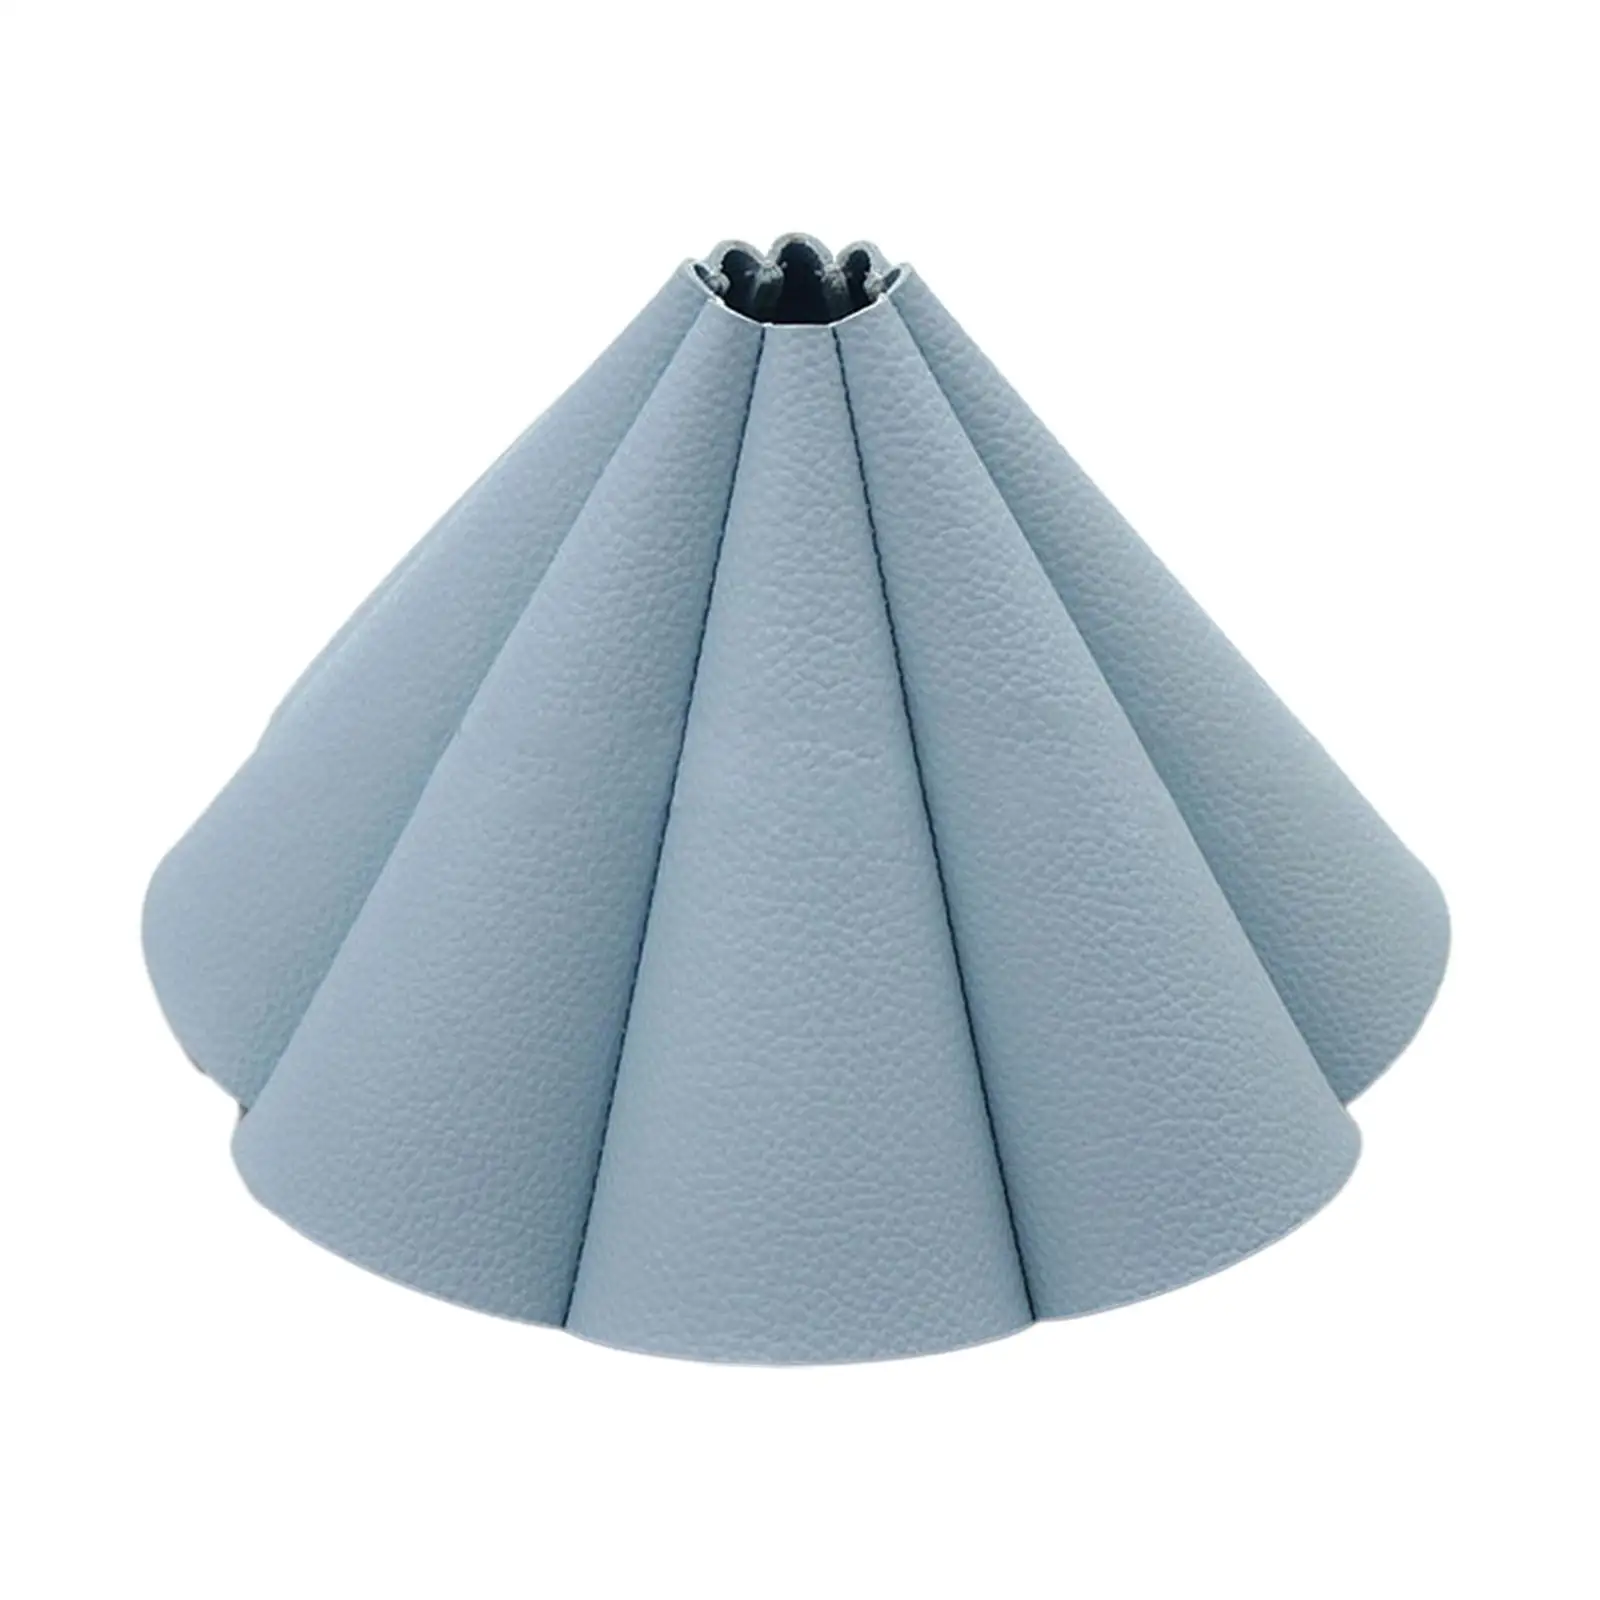 Waterproof Ornament Fashion Lamp Cover Replacement Detachable Dust Proof Durable Lamp Shade for Camping Home